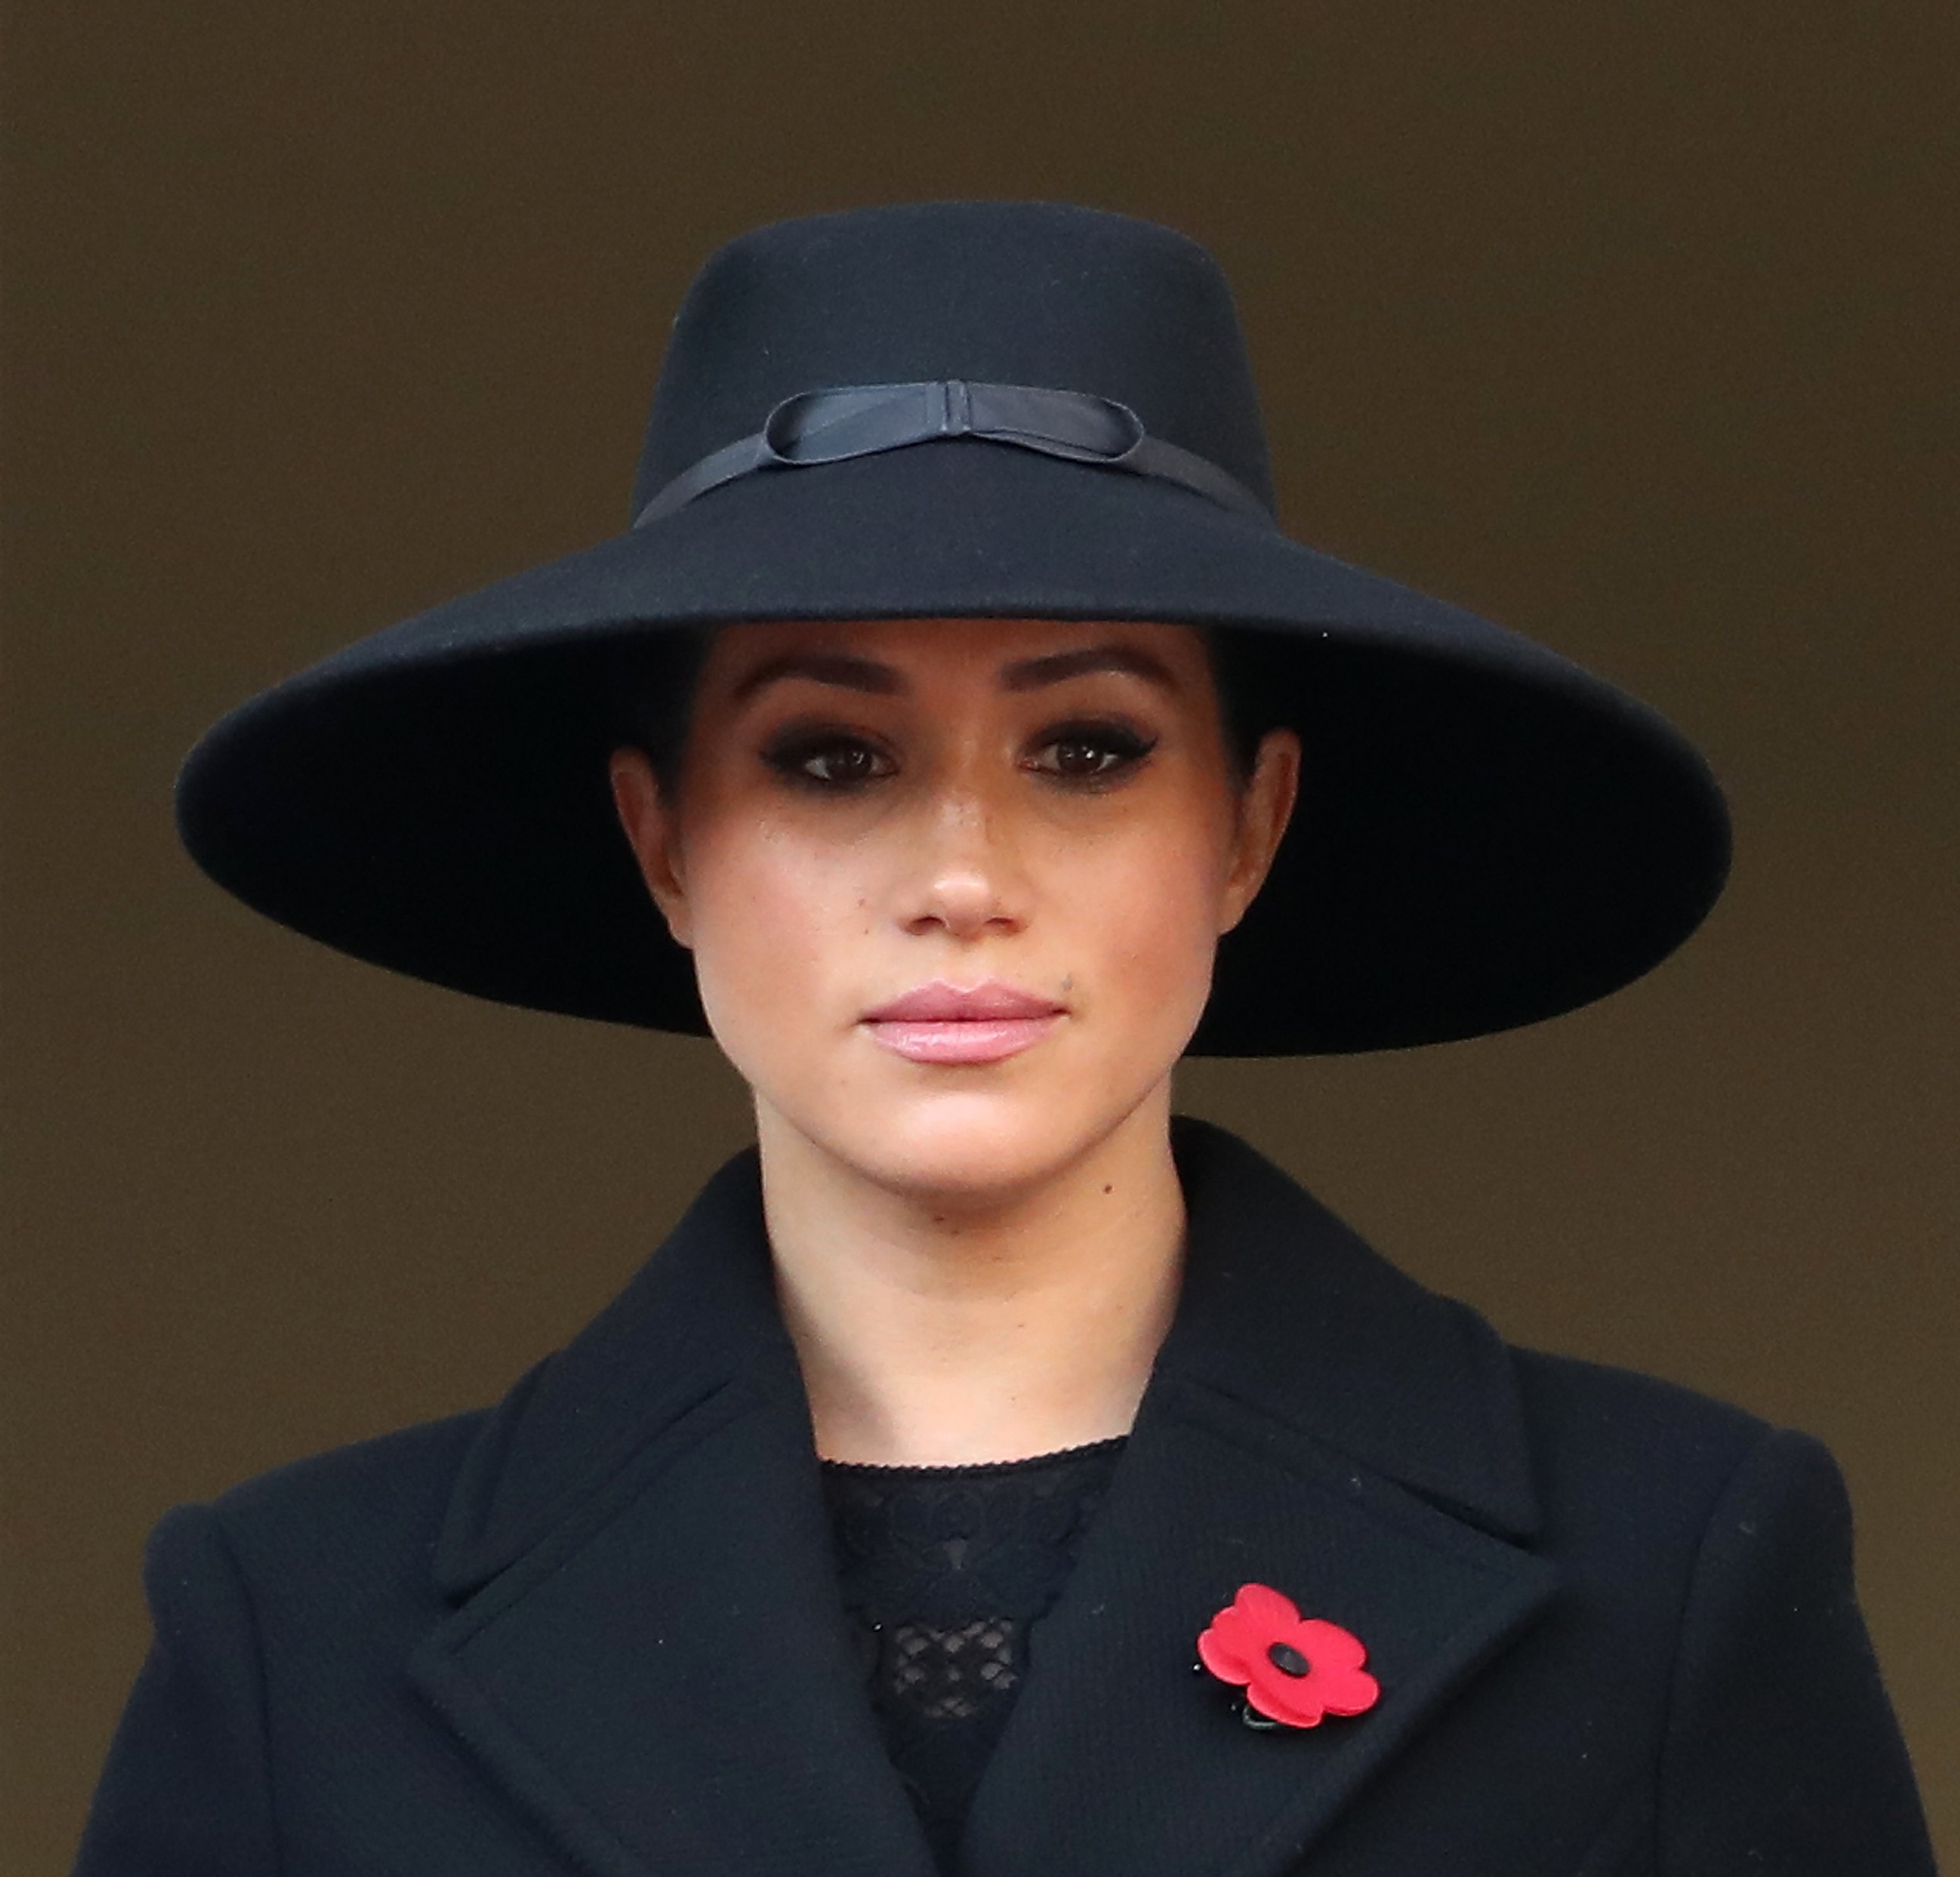 Meghan Markle, Duchess of Sussex, attends the annual Remembrance Sunday memorial at The Cenotaph on November 10, 2019 in London, England ┃Source: Getty Images